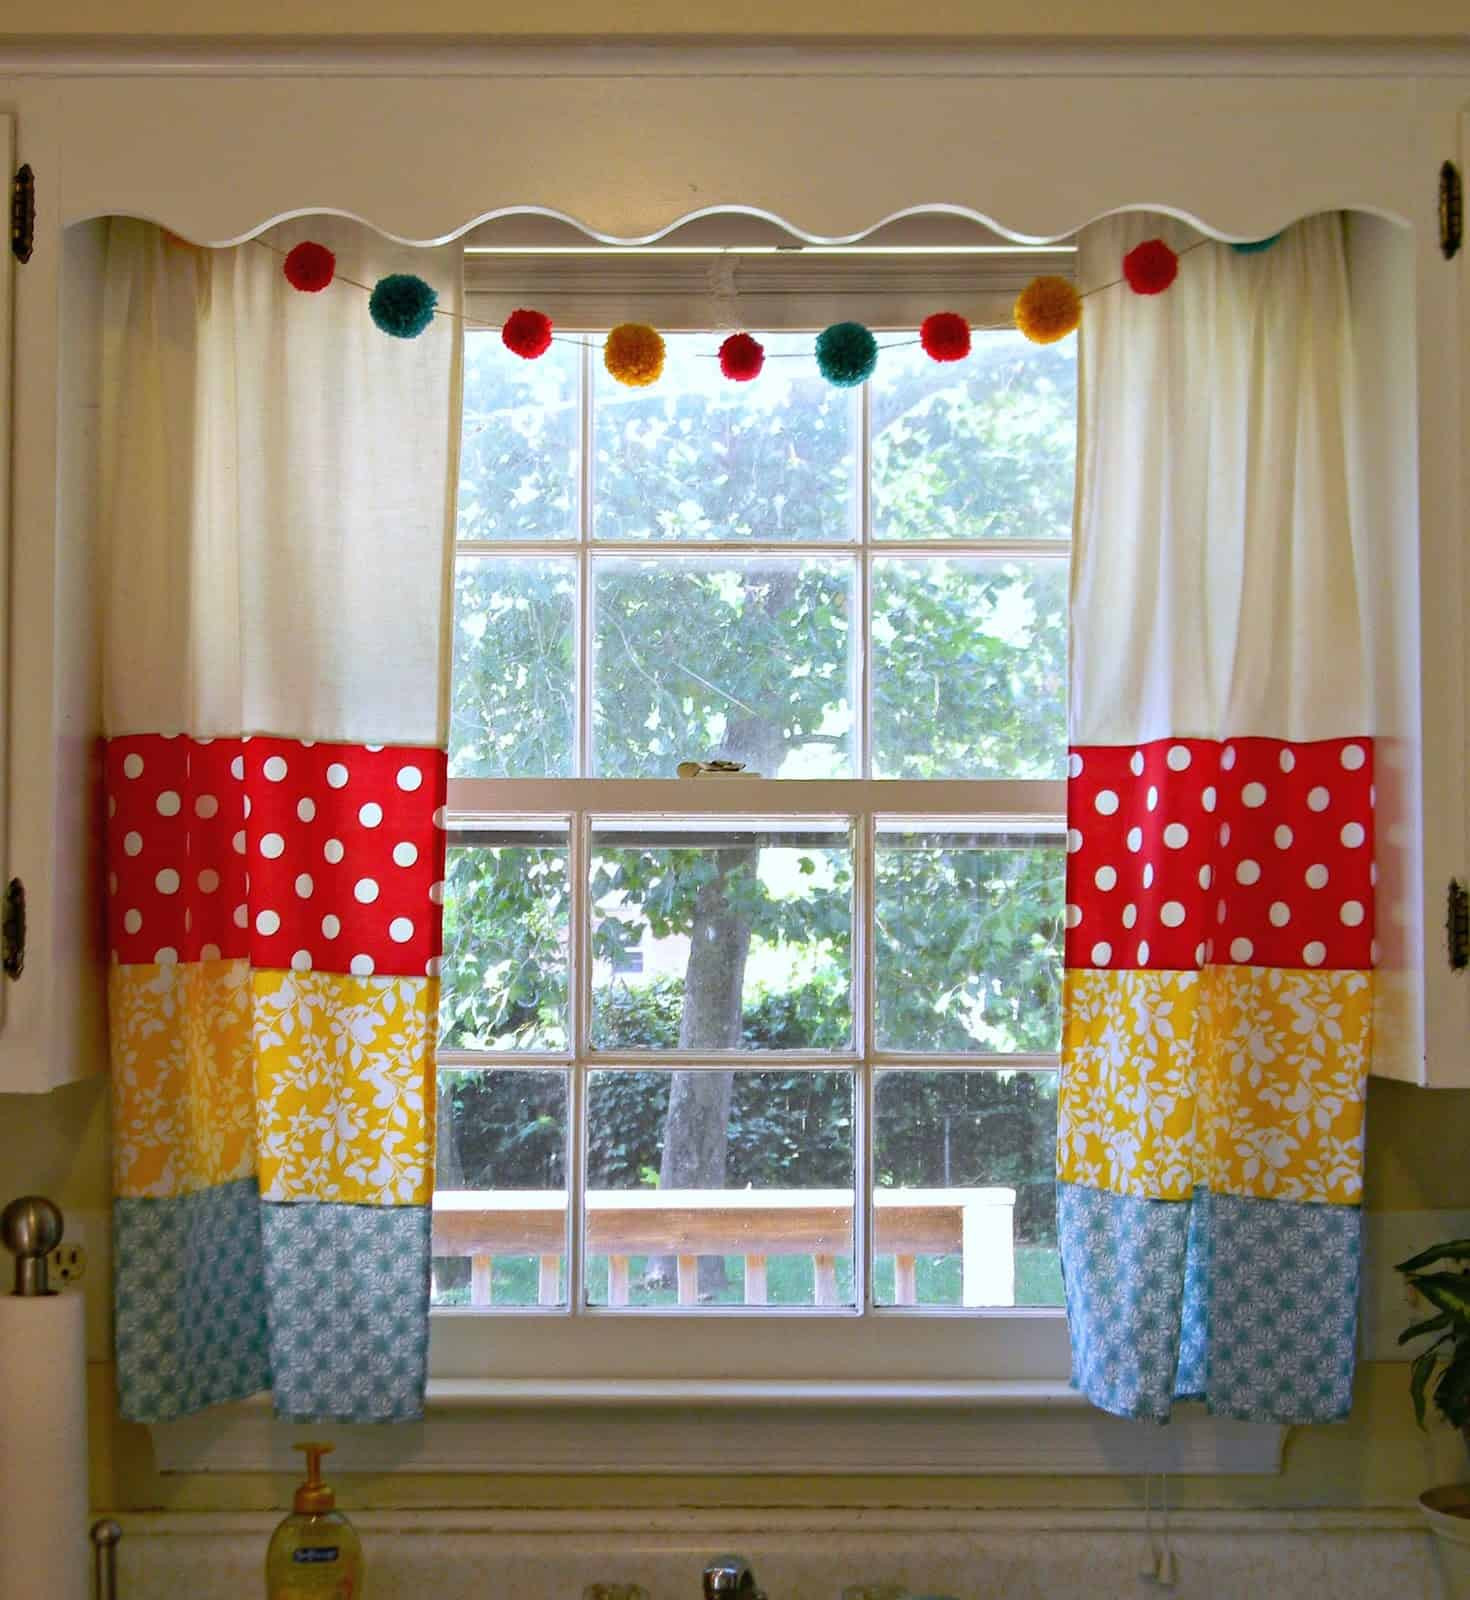 Kitchen Curtains Images
 Selection of Kitchen Curtains for Modern Home Decoration